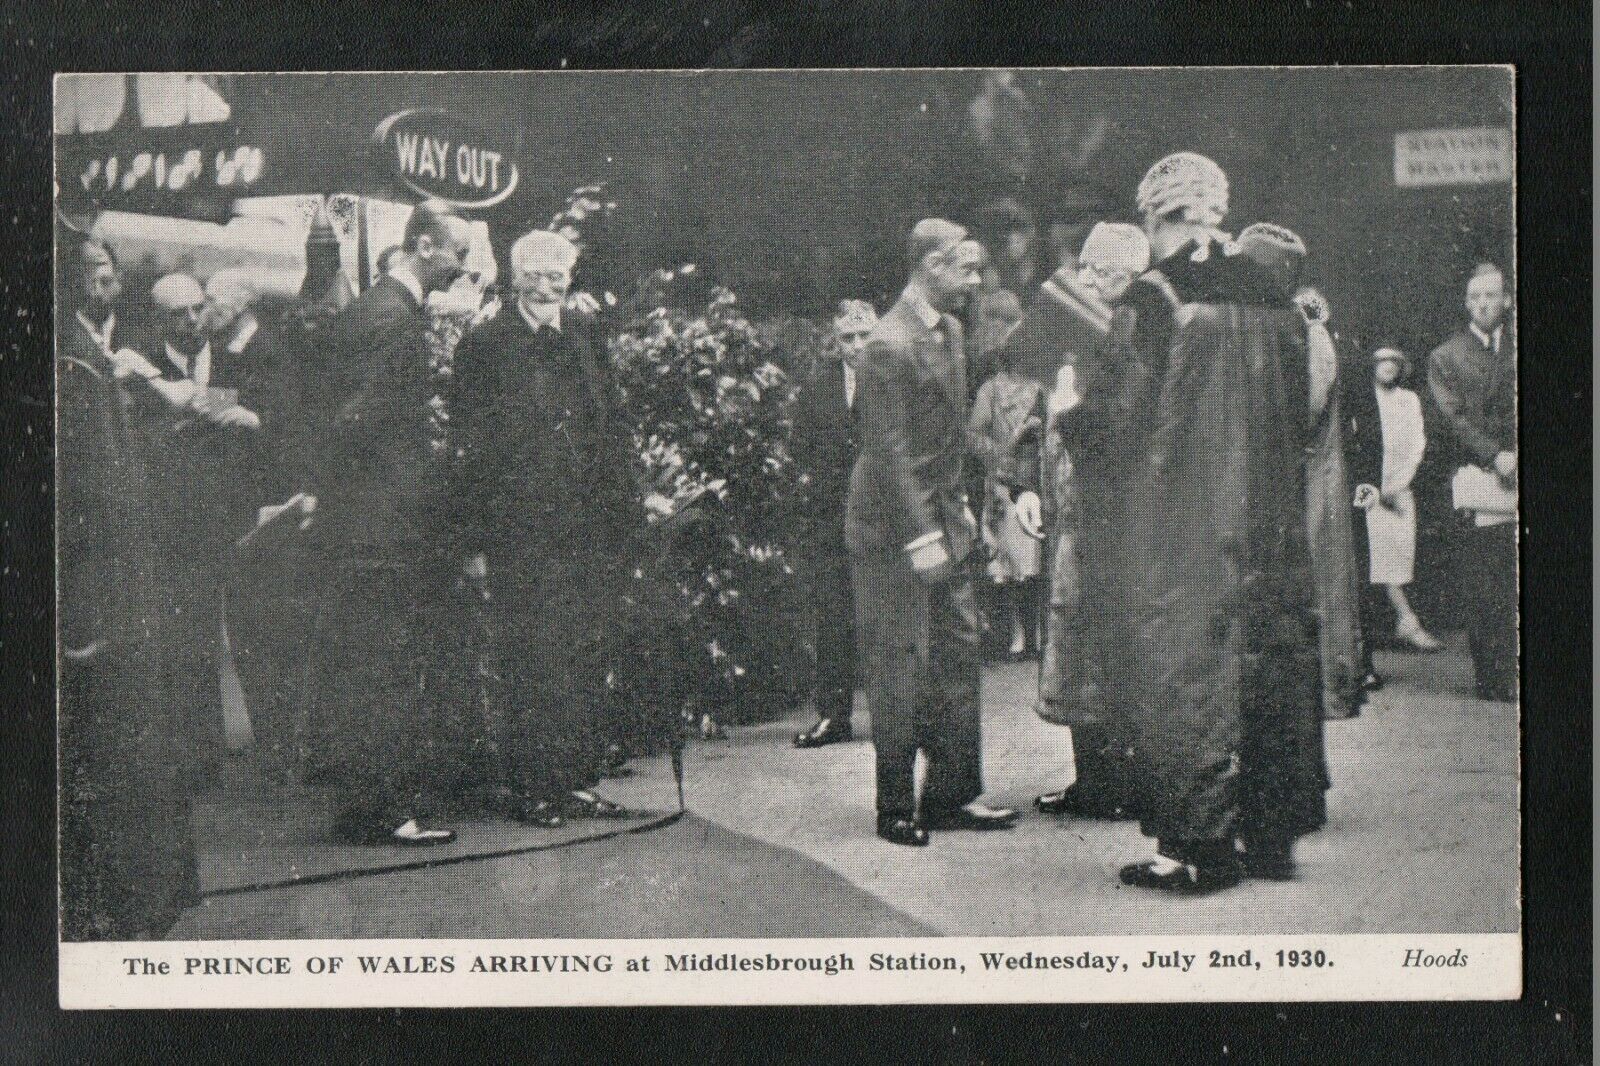 House Clearance - The Prince of Wales Arriving at Middlesbrough Railway Station 1930 Service